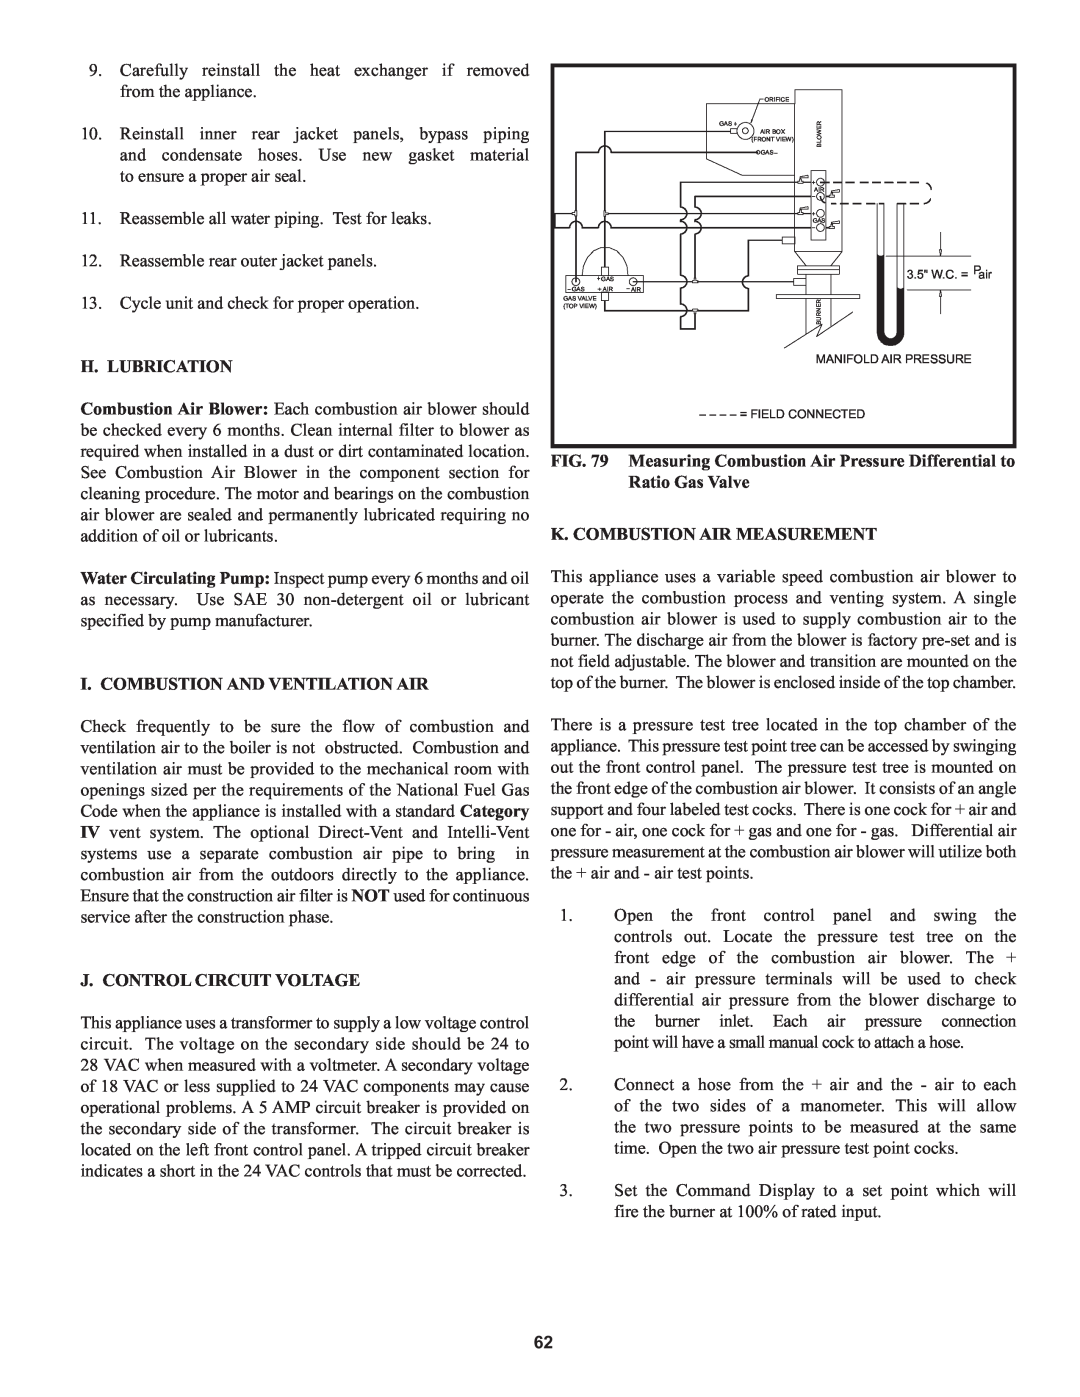 Lochinvar 000 H. Lubrication, I. Combustion And Ventilation Air, J. Control Circuit Voltage, K. Combustion Air Measurement 